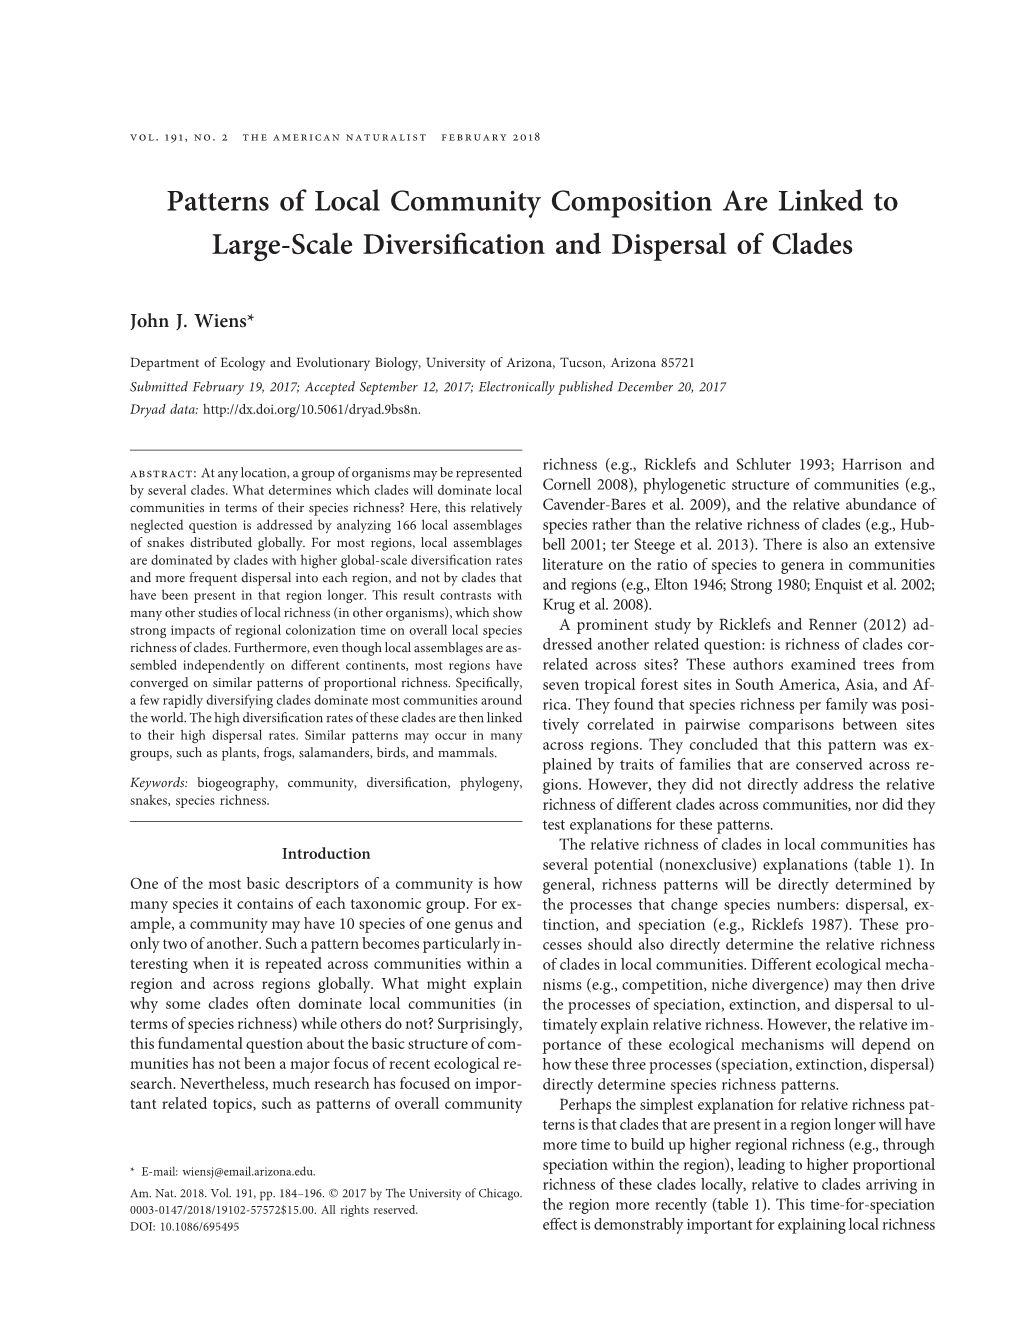 Patterns of Local Community Composition Are Linked to Large-Scale Diversiﬁcation and Dispersal of Clades